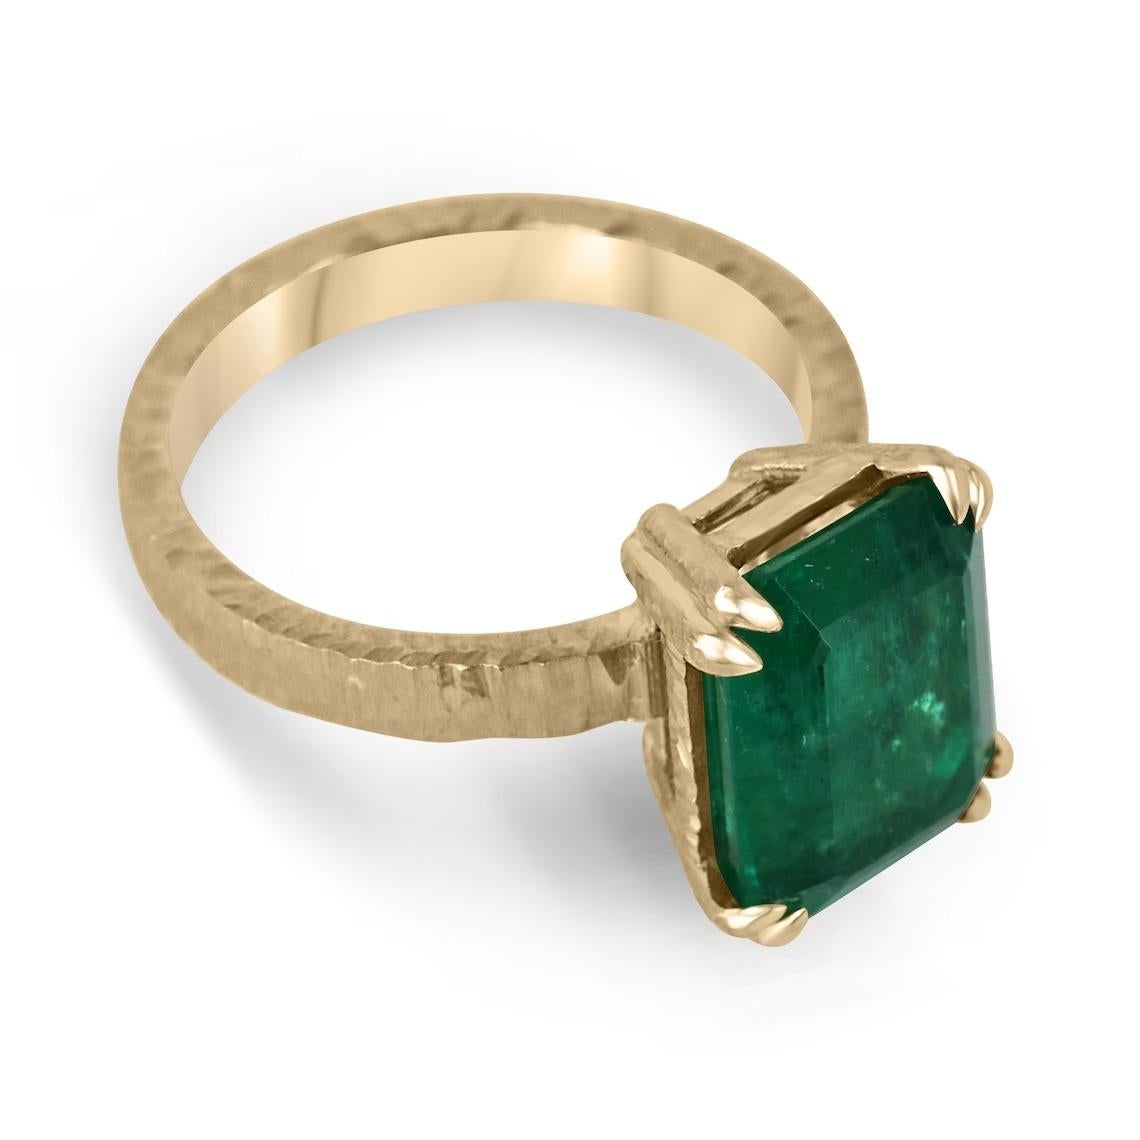 This 4.45-carat natural emerald cut emerald from Zambia is a showstopper. The emerald is cut in a classic emerald cut style, which shows off the stone's clarity and depth of color. The emerald is set in a unique four-double claw prong setting, which